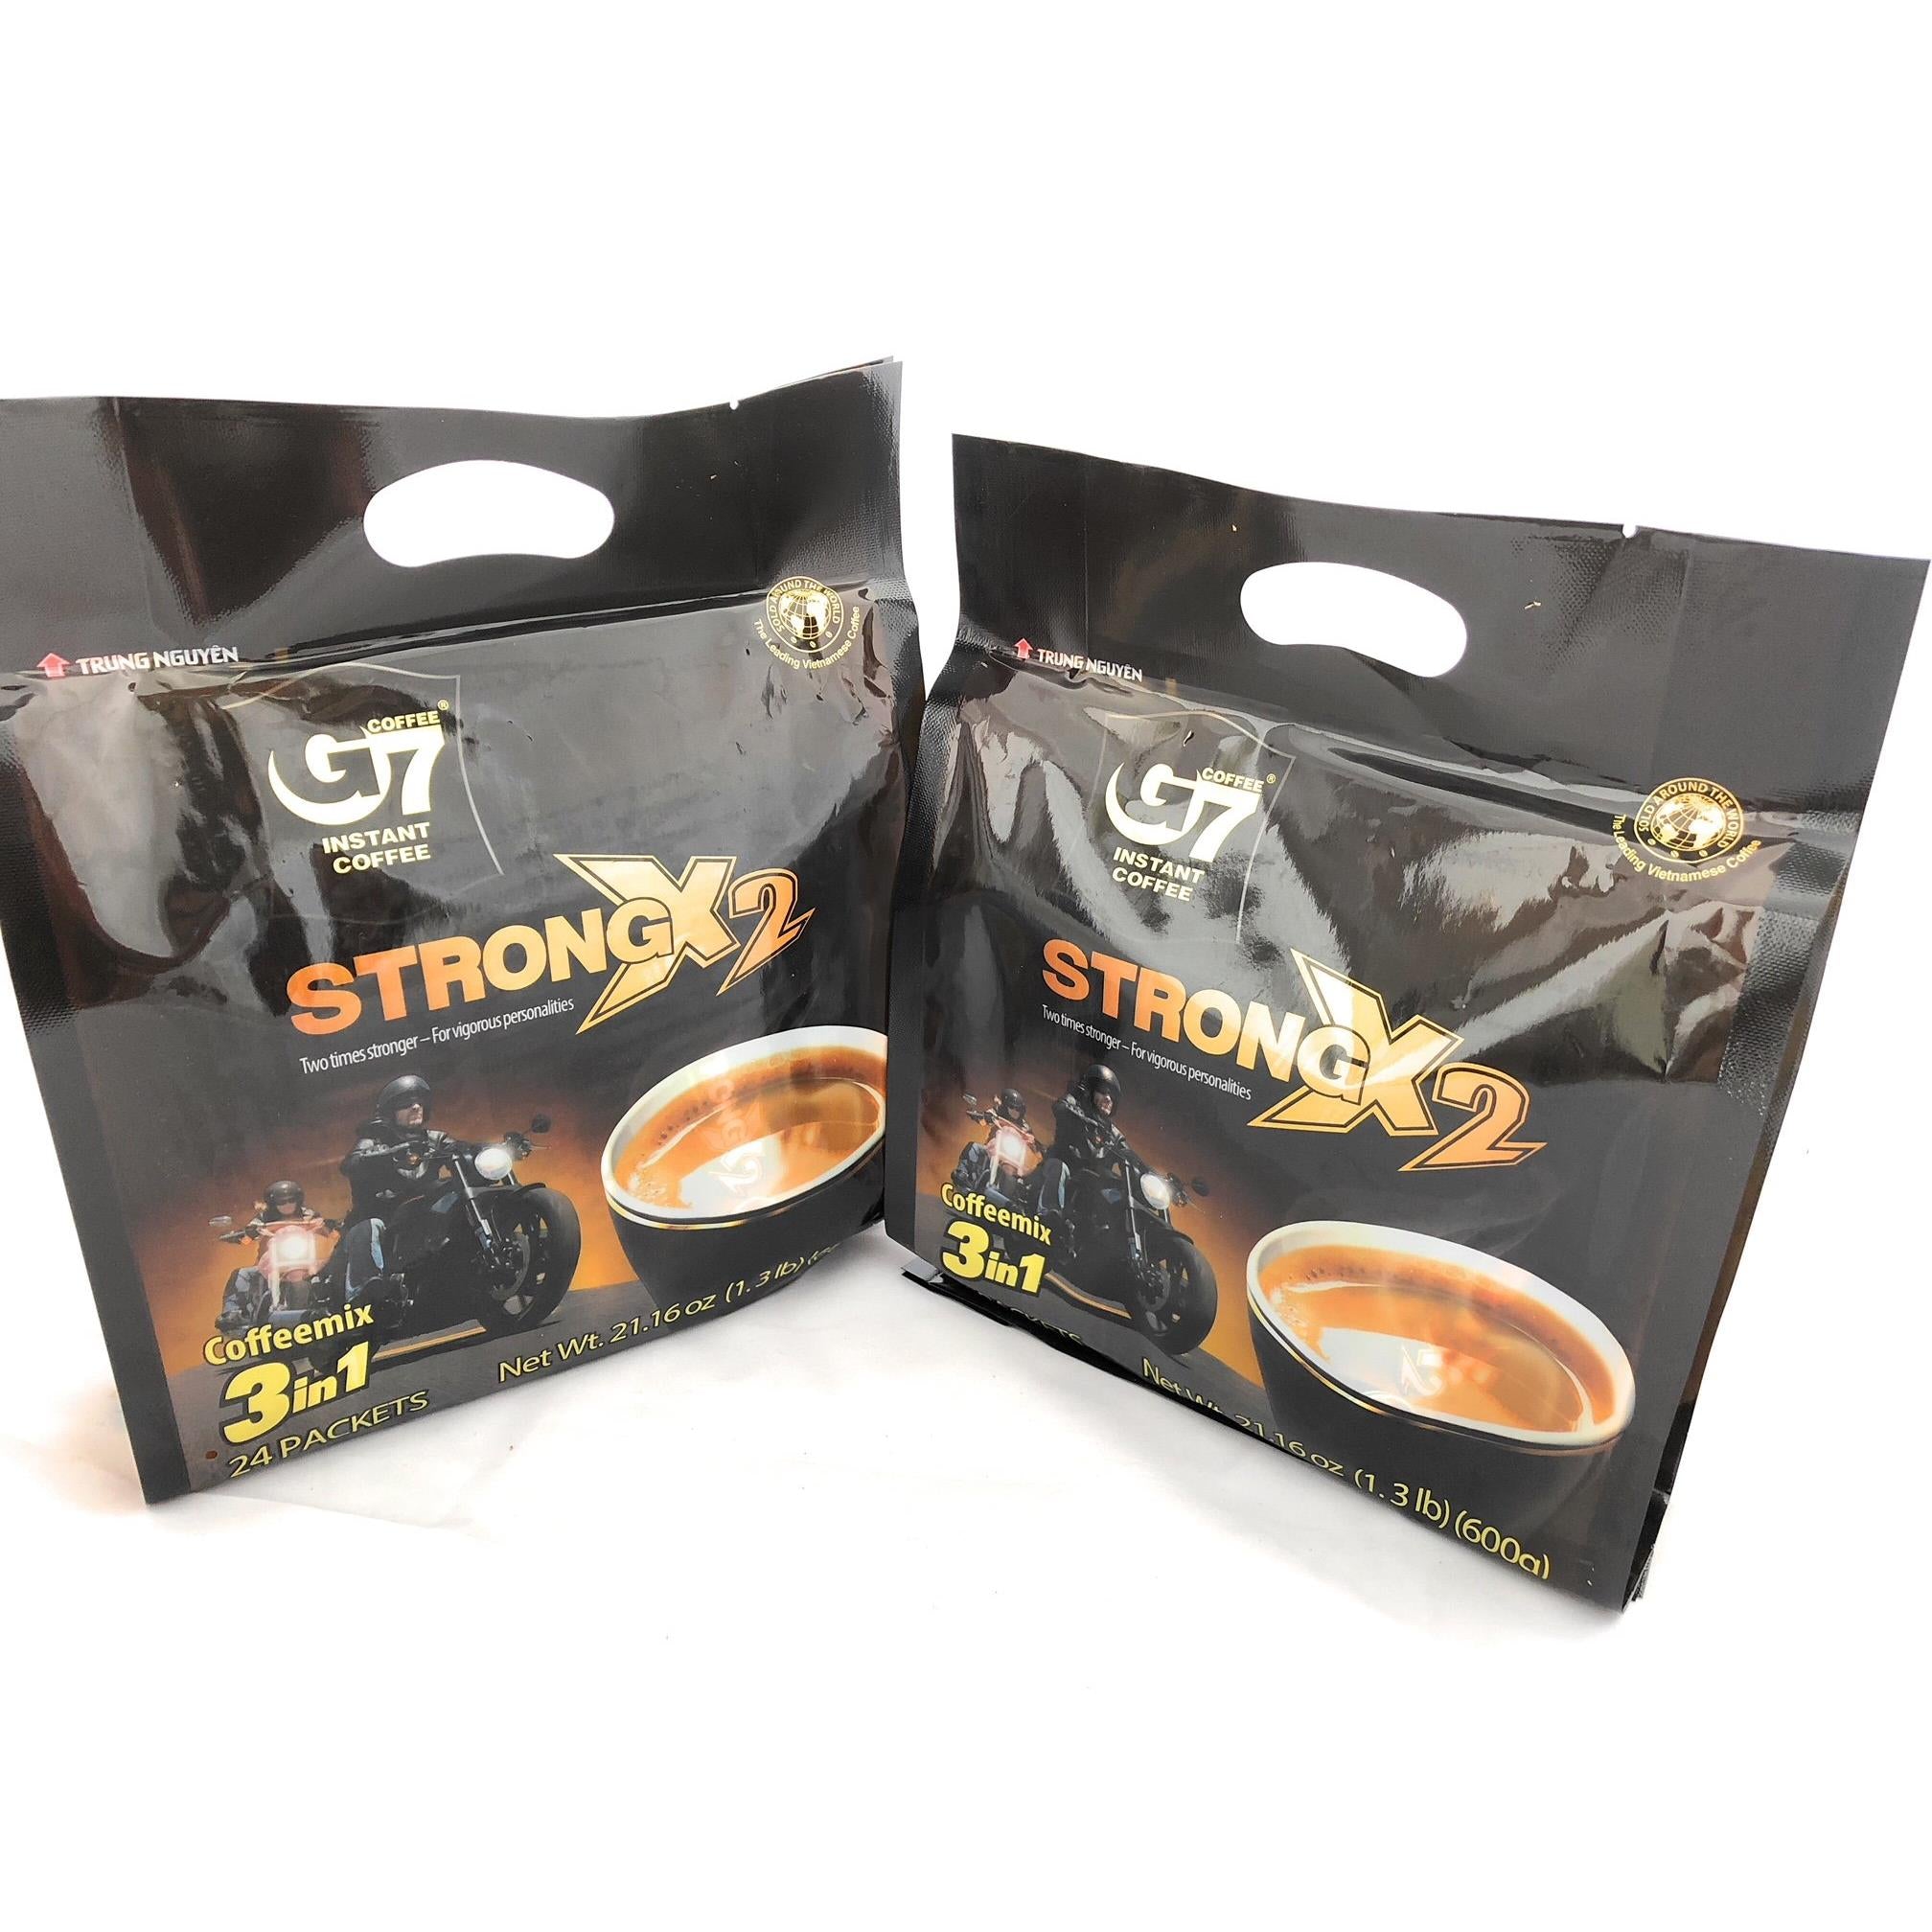 Trung Nguyen - G7 Strong X2 3 In 1 Instant Coffee - 24 sticks - with Creamer and Sugar, Pack of 2 (24 sticks x 25gr/stick)